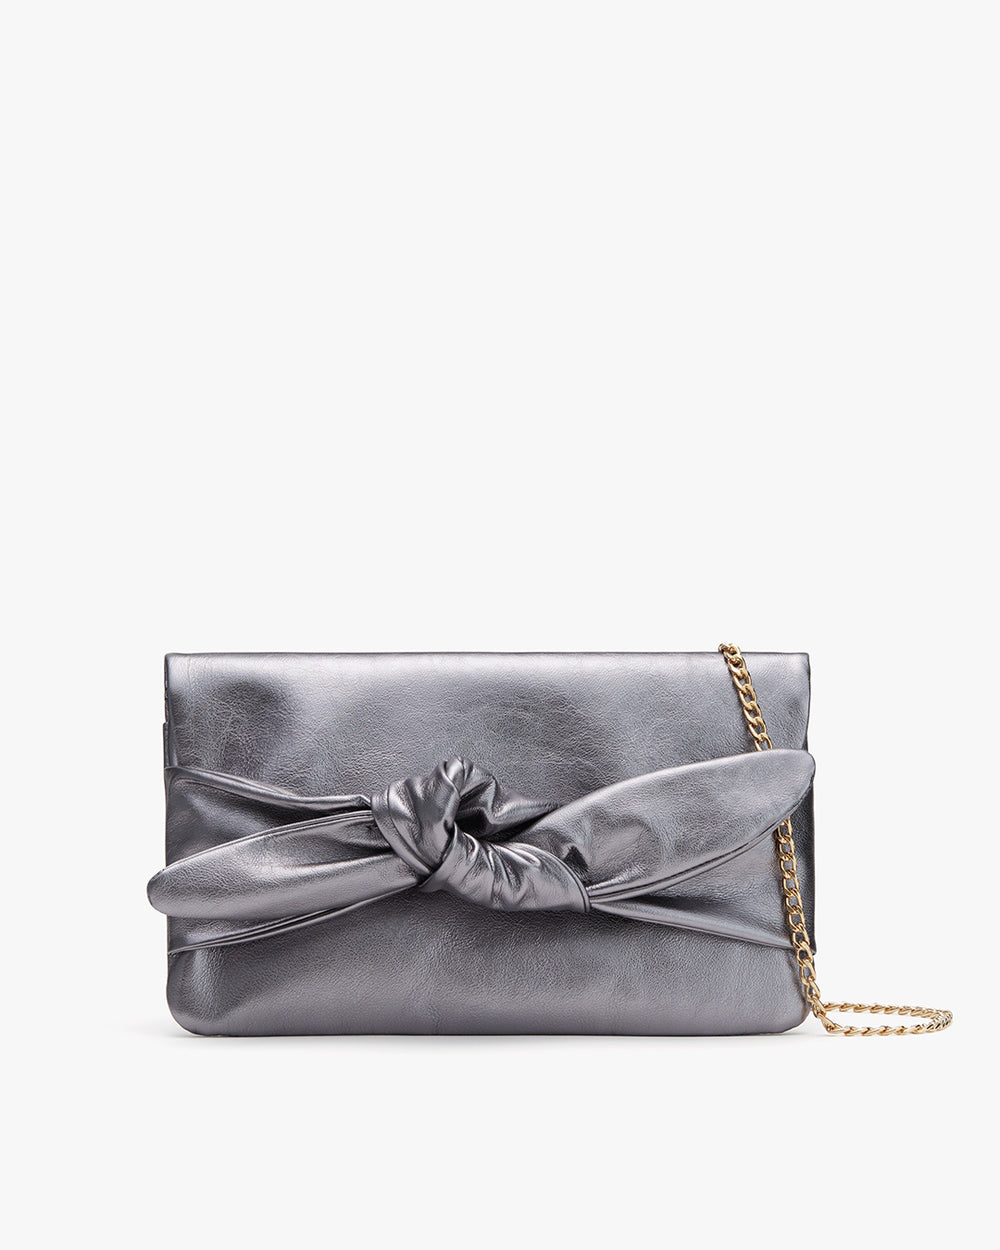 Purse with a bow and chain strap against a plain background.